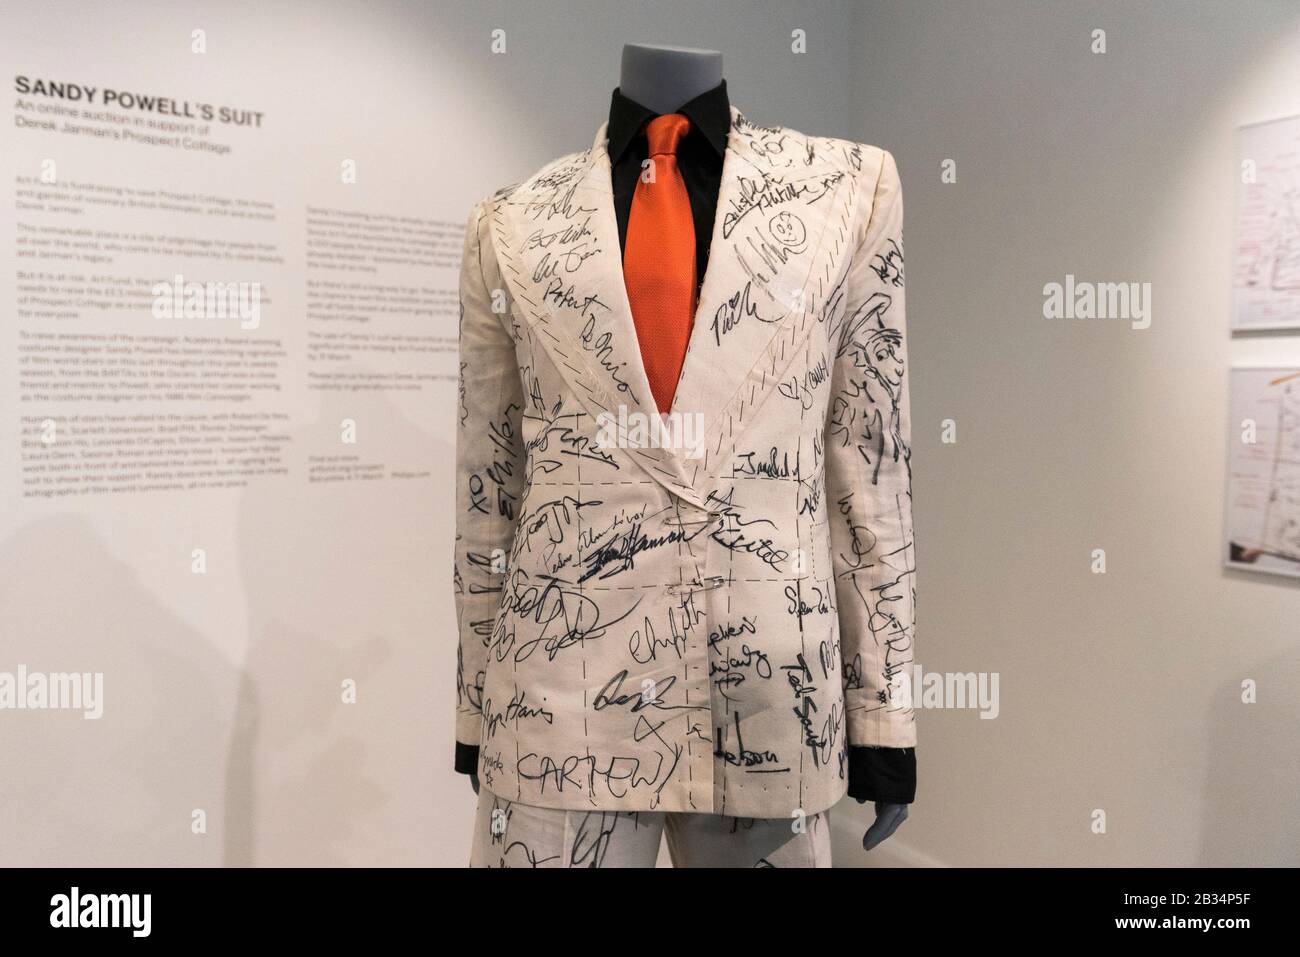 London, UK. 4 March 2020. A suit designed by Academy-Award winning costume  designer Sandy Powell is on display ahead of being offered for auction at  Phillips, Berkeley Square. Worn by Powell at